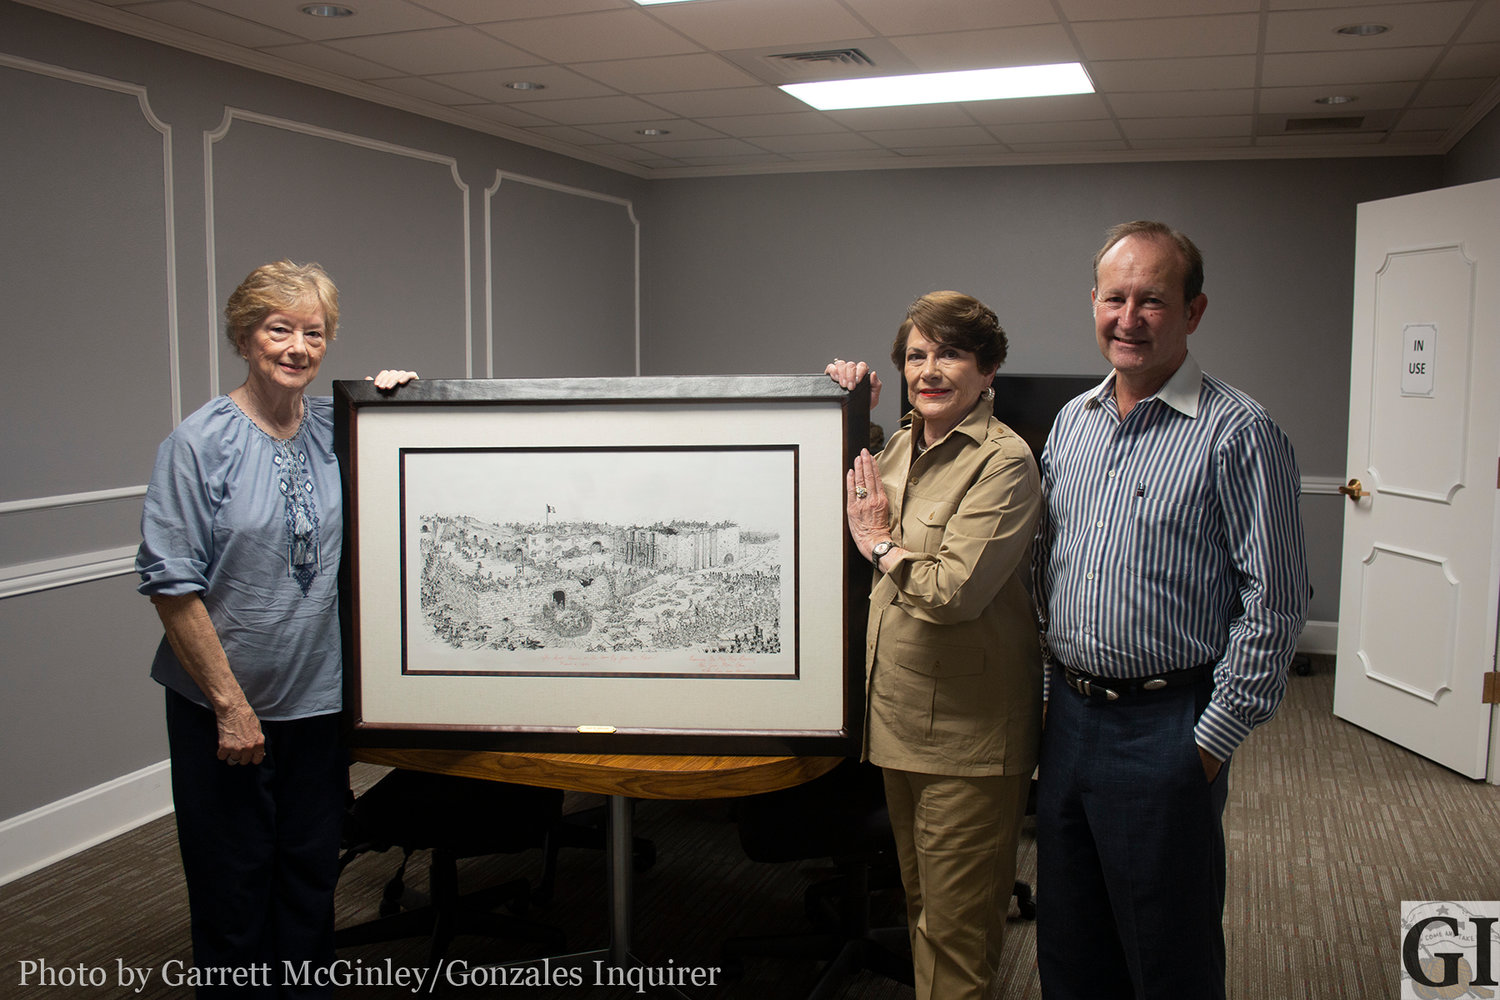 Clint Hille, Carol Eakman and Library Board President Vicki Frenzel pose with the James Robertson drawing donated by Rex Bushong on behalf of his late wife Vickie.